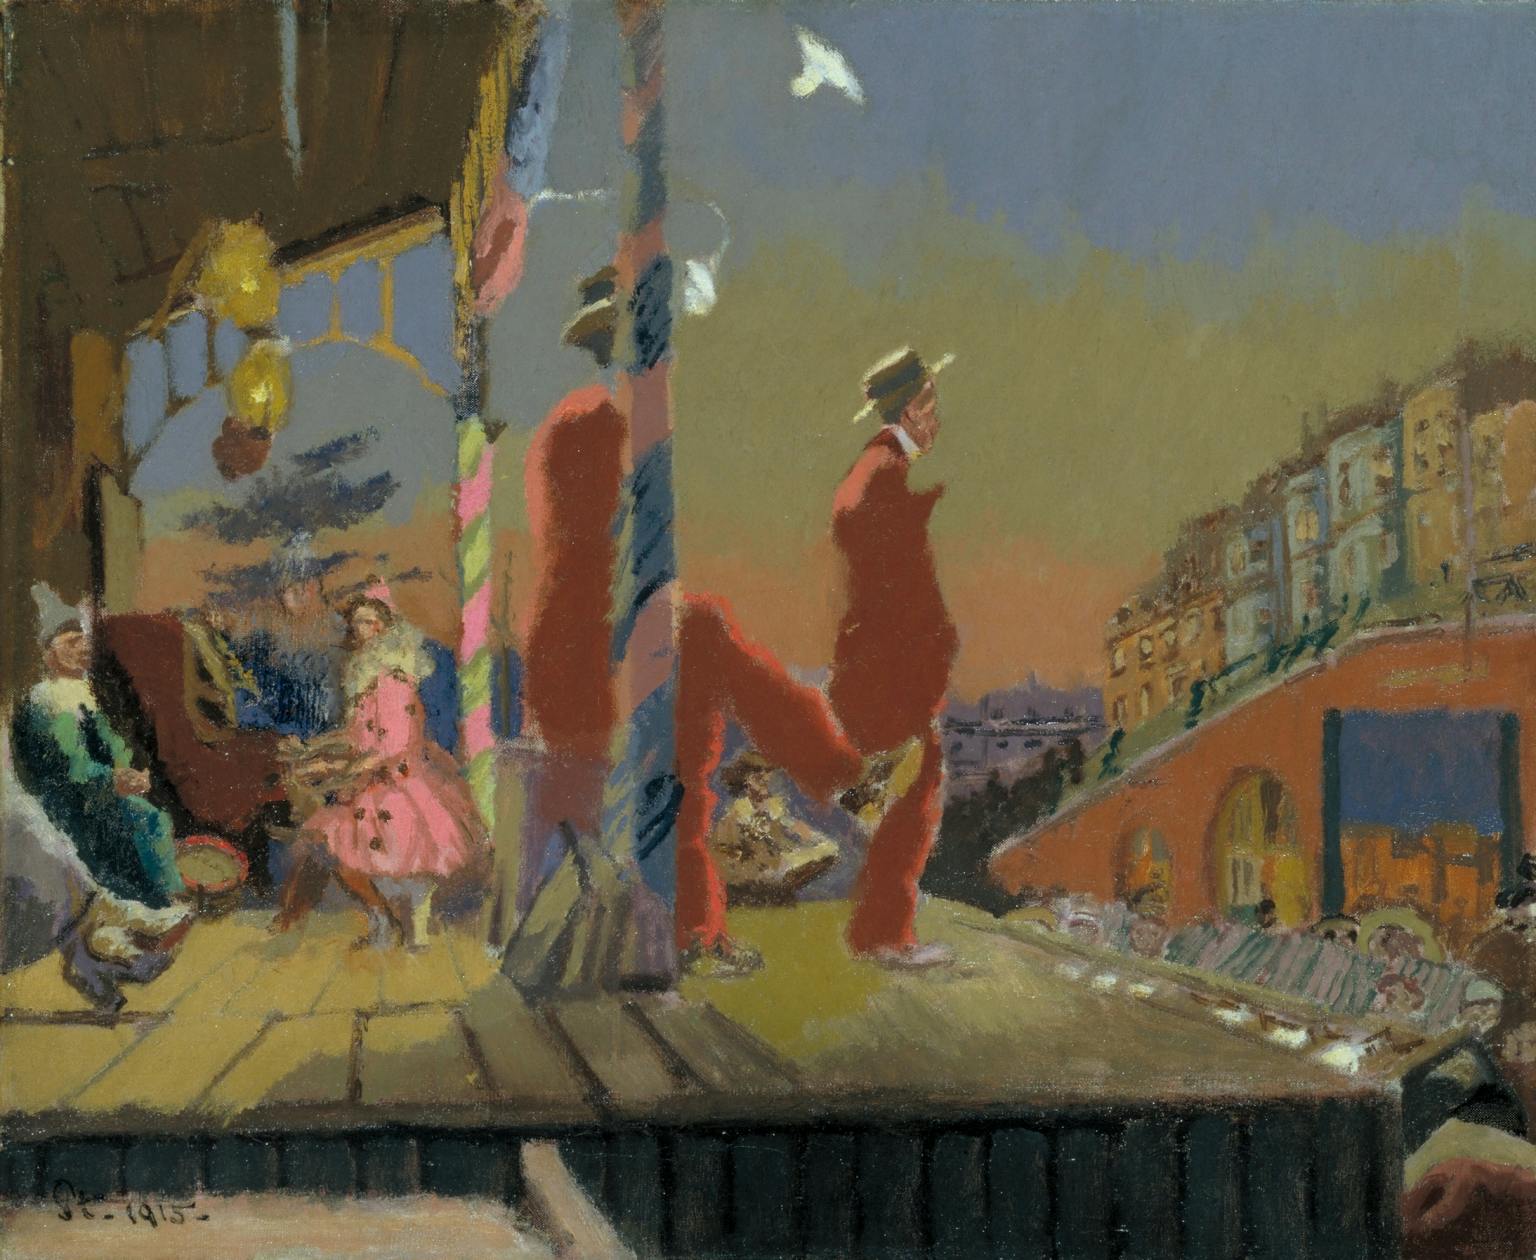 Walter Sickert Brighton Pierrots 1915. Tate, purchased with assistance from the Art Fund and the Friends of the Tate Gallery 1996